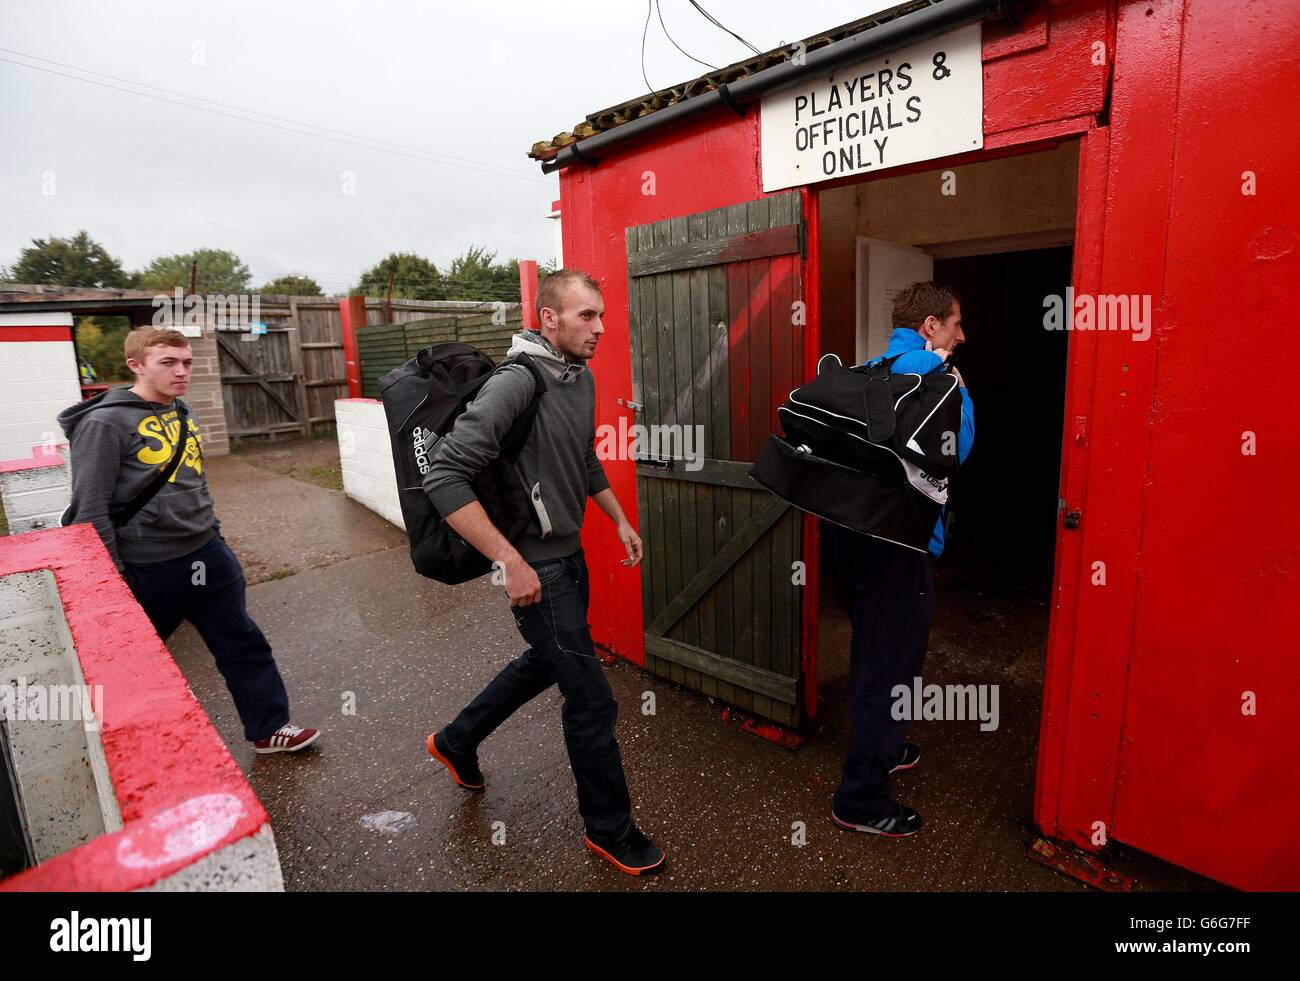 Soccer - FA Cup Qualifying - Third Round - Atherstone Town v Barrow - Sheepy Road. Barrow players arrive for the FA Cup Qualifying, Third Round match at Sheepy Road, Atherstone. Stock Photo